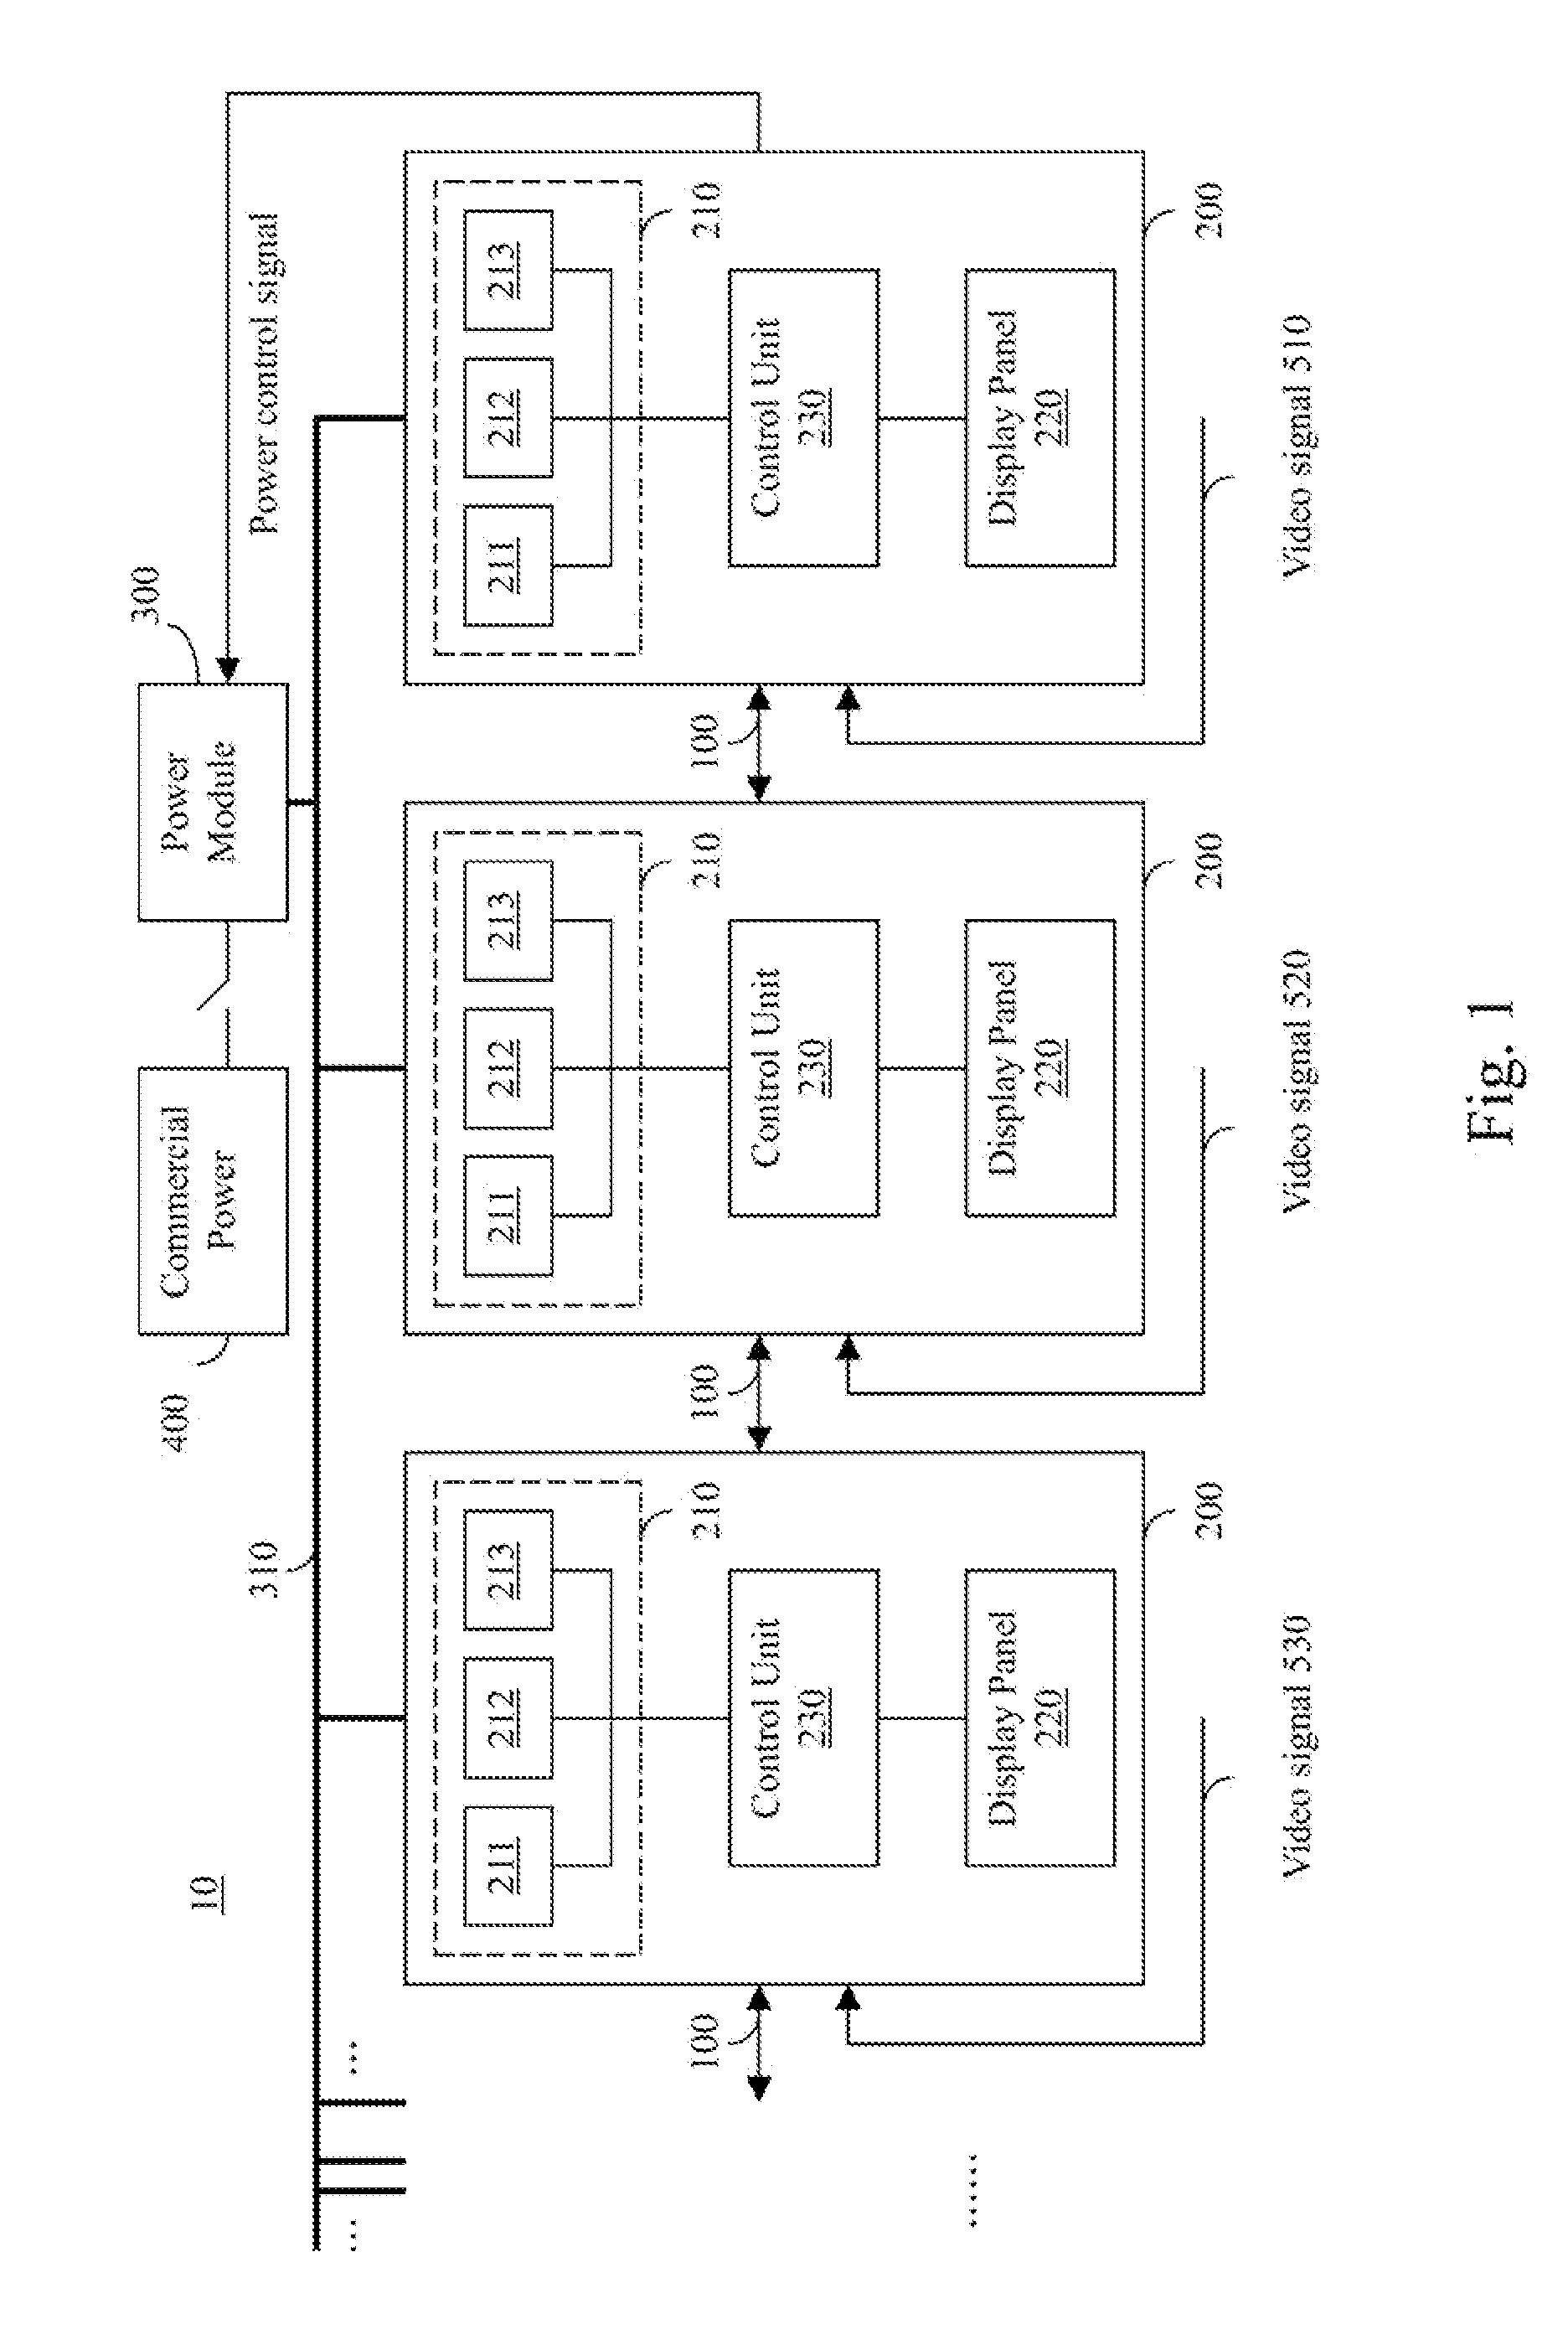 Synchronous and asymmetrical display system and method of operating the same